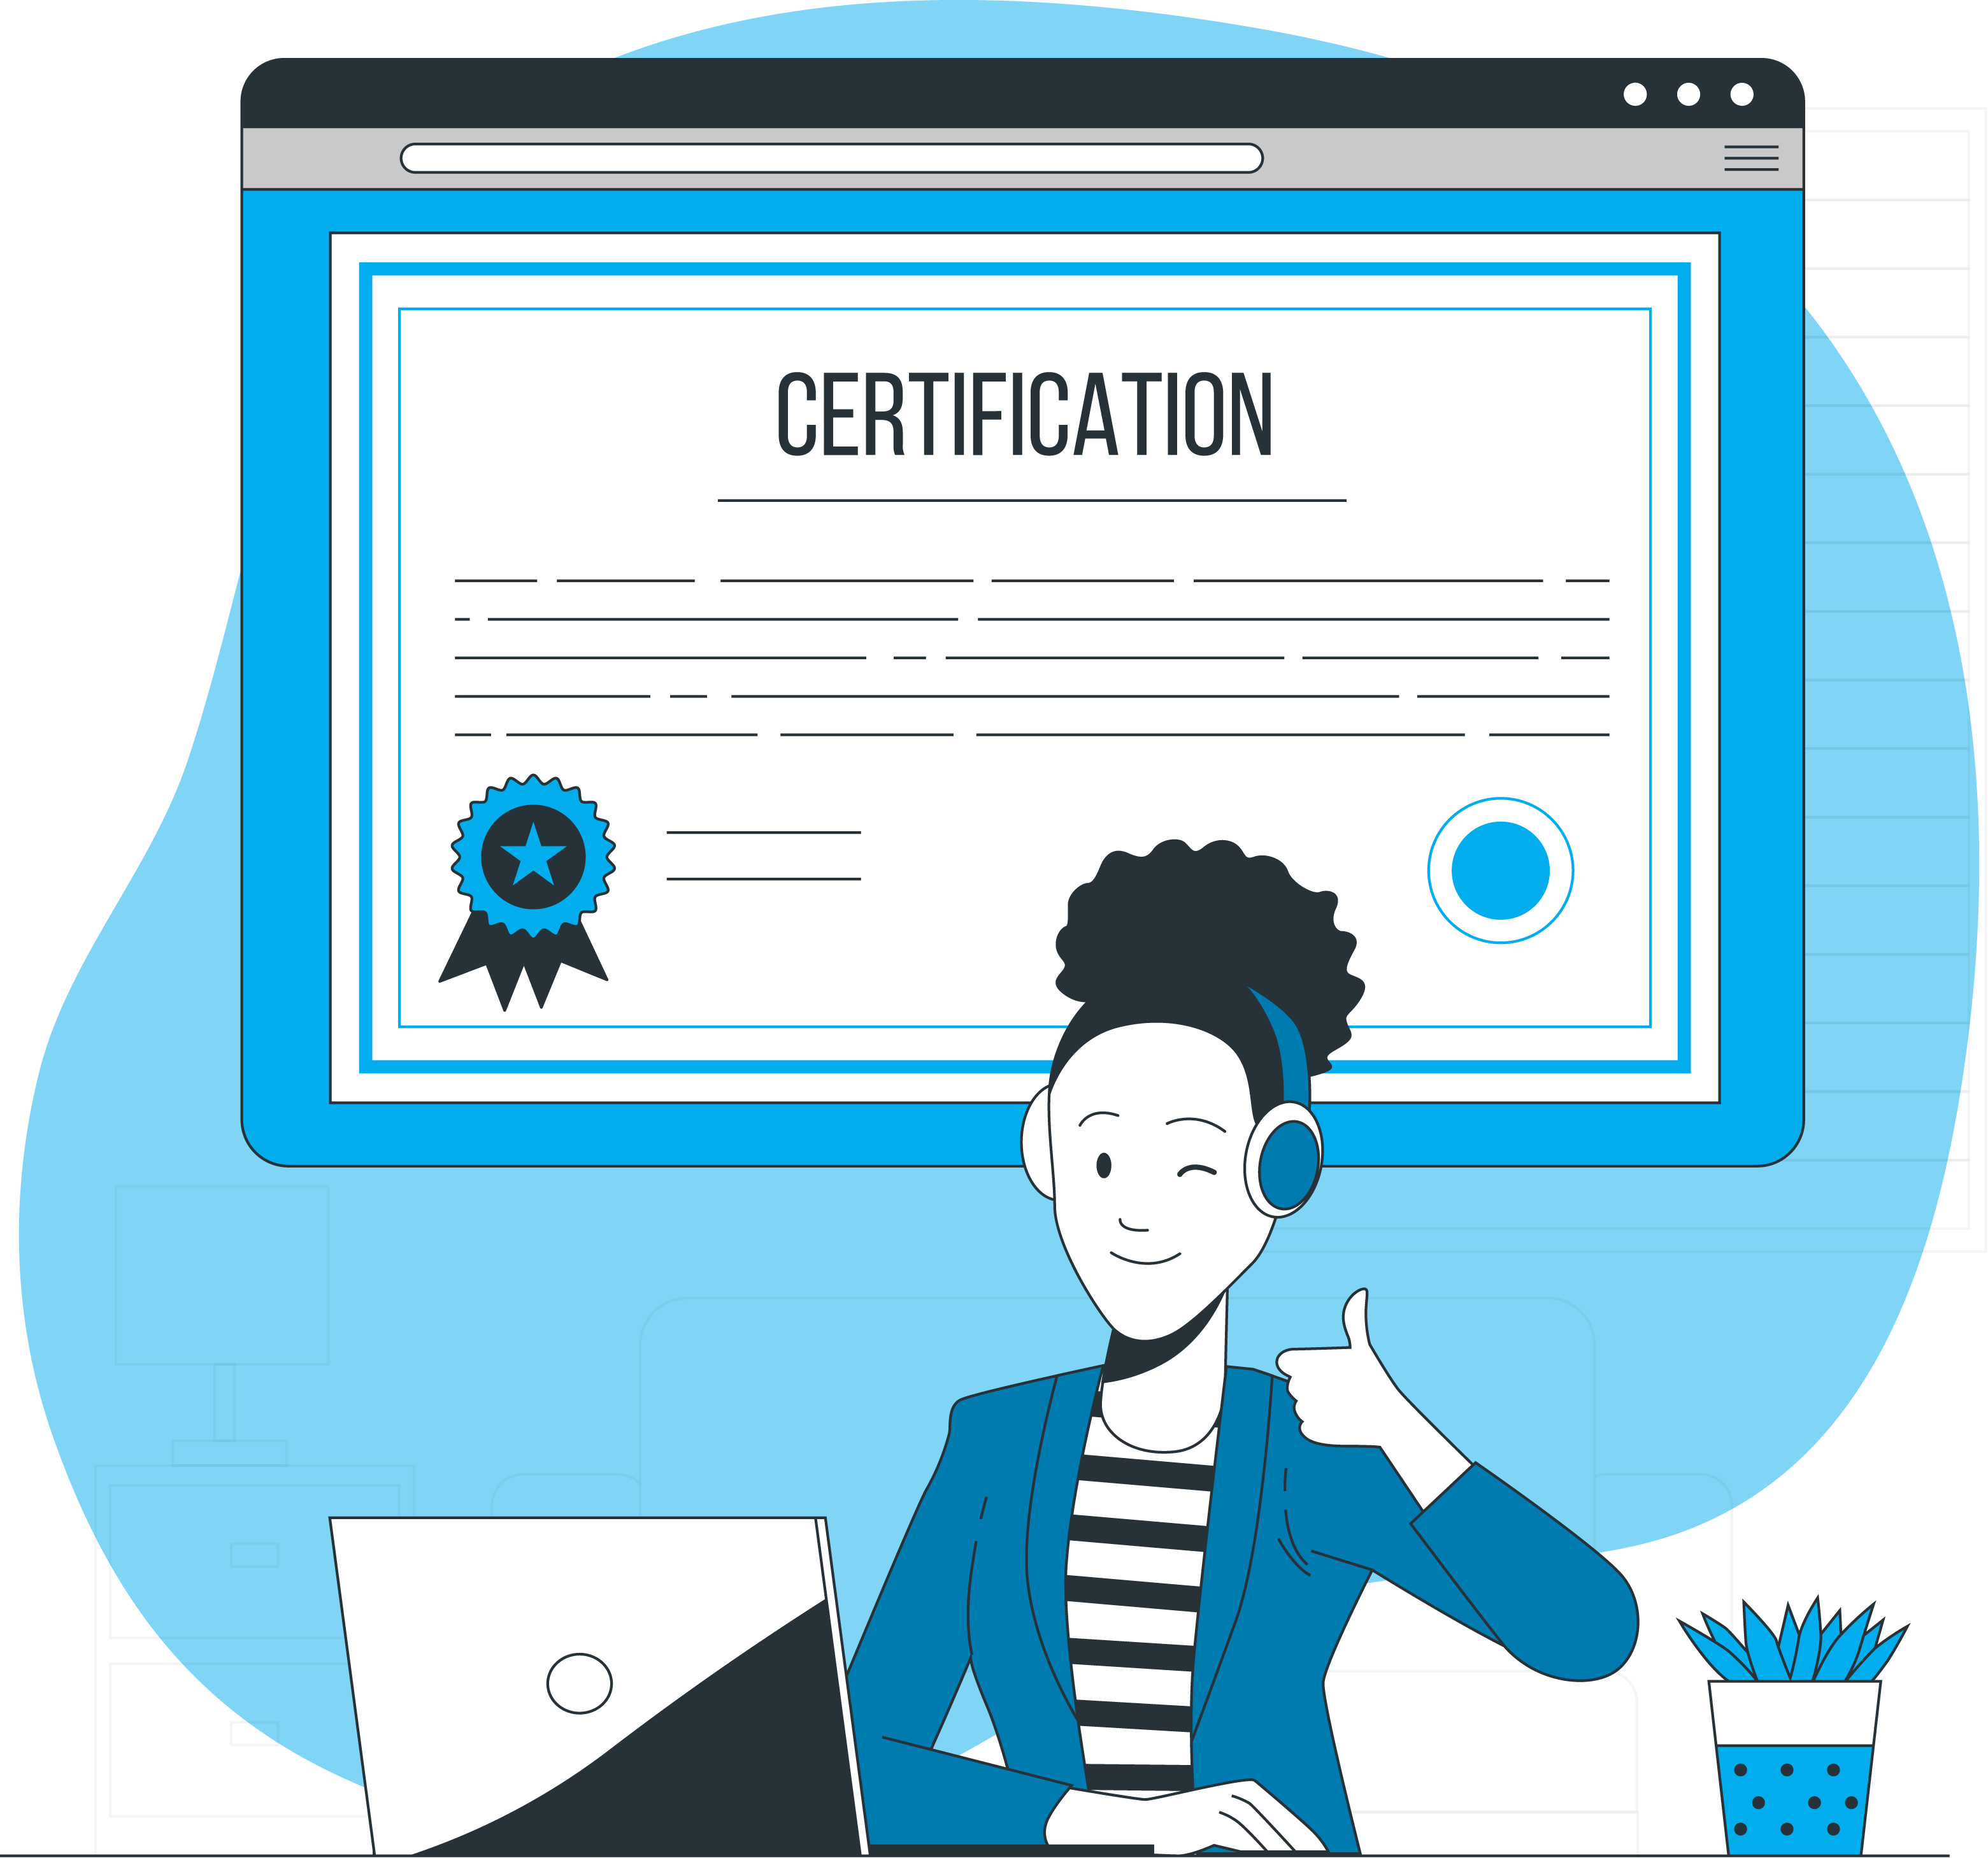 Illustration of woman wearing a headset standing in front of a certificate and giving a thumbs up.